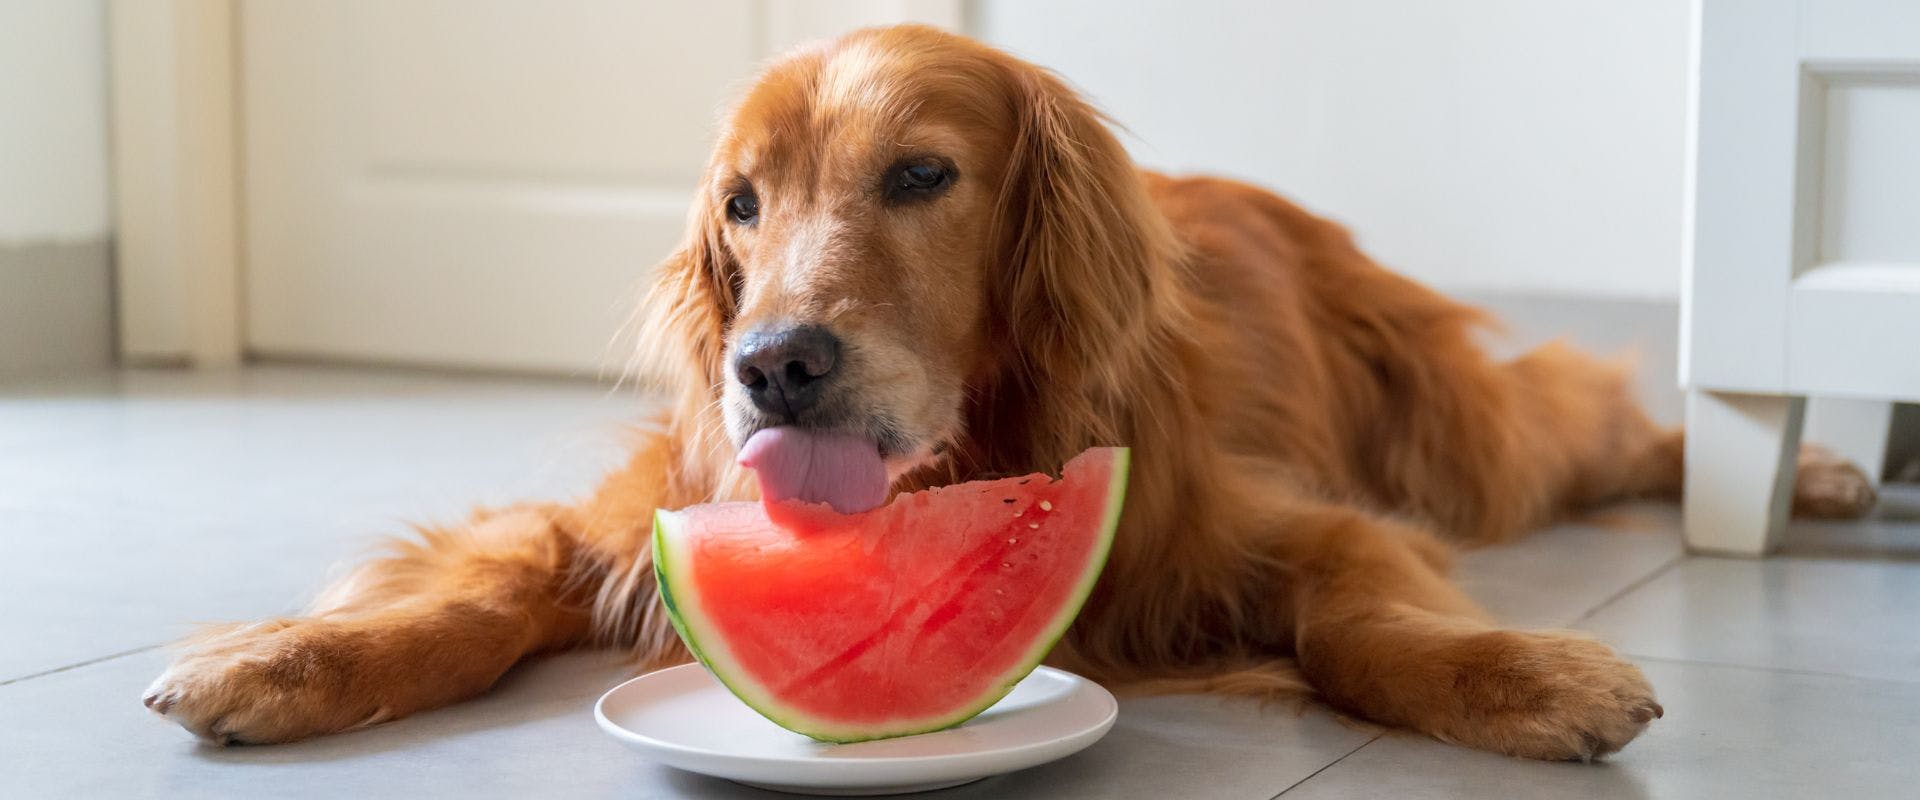 Brown dog eating watermelon